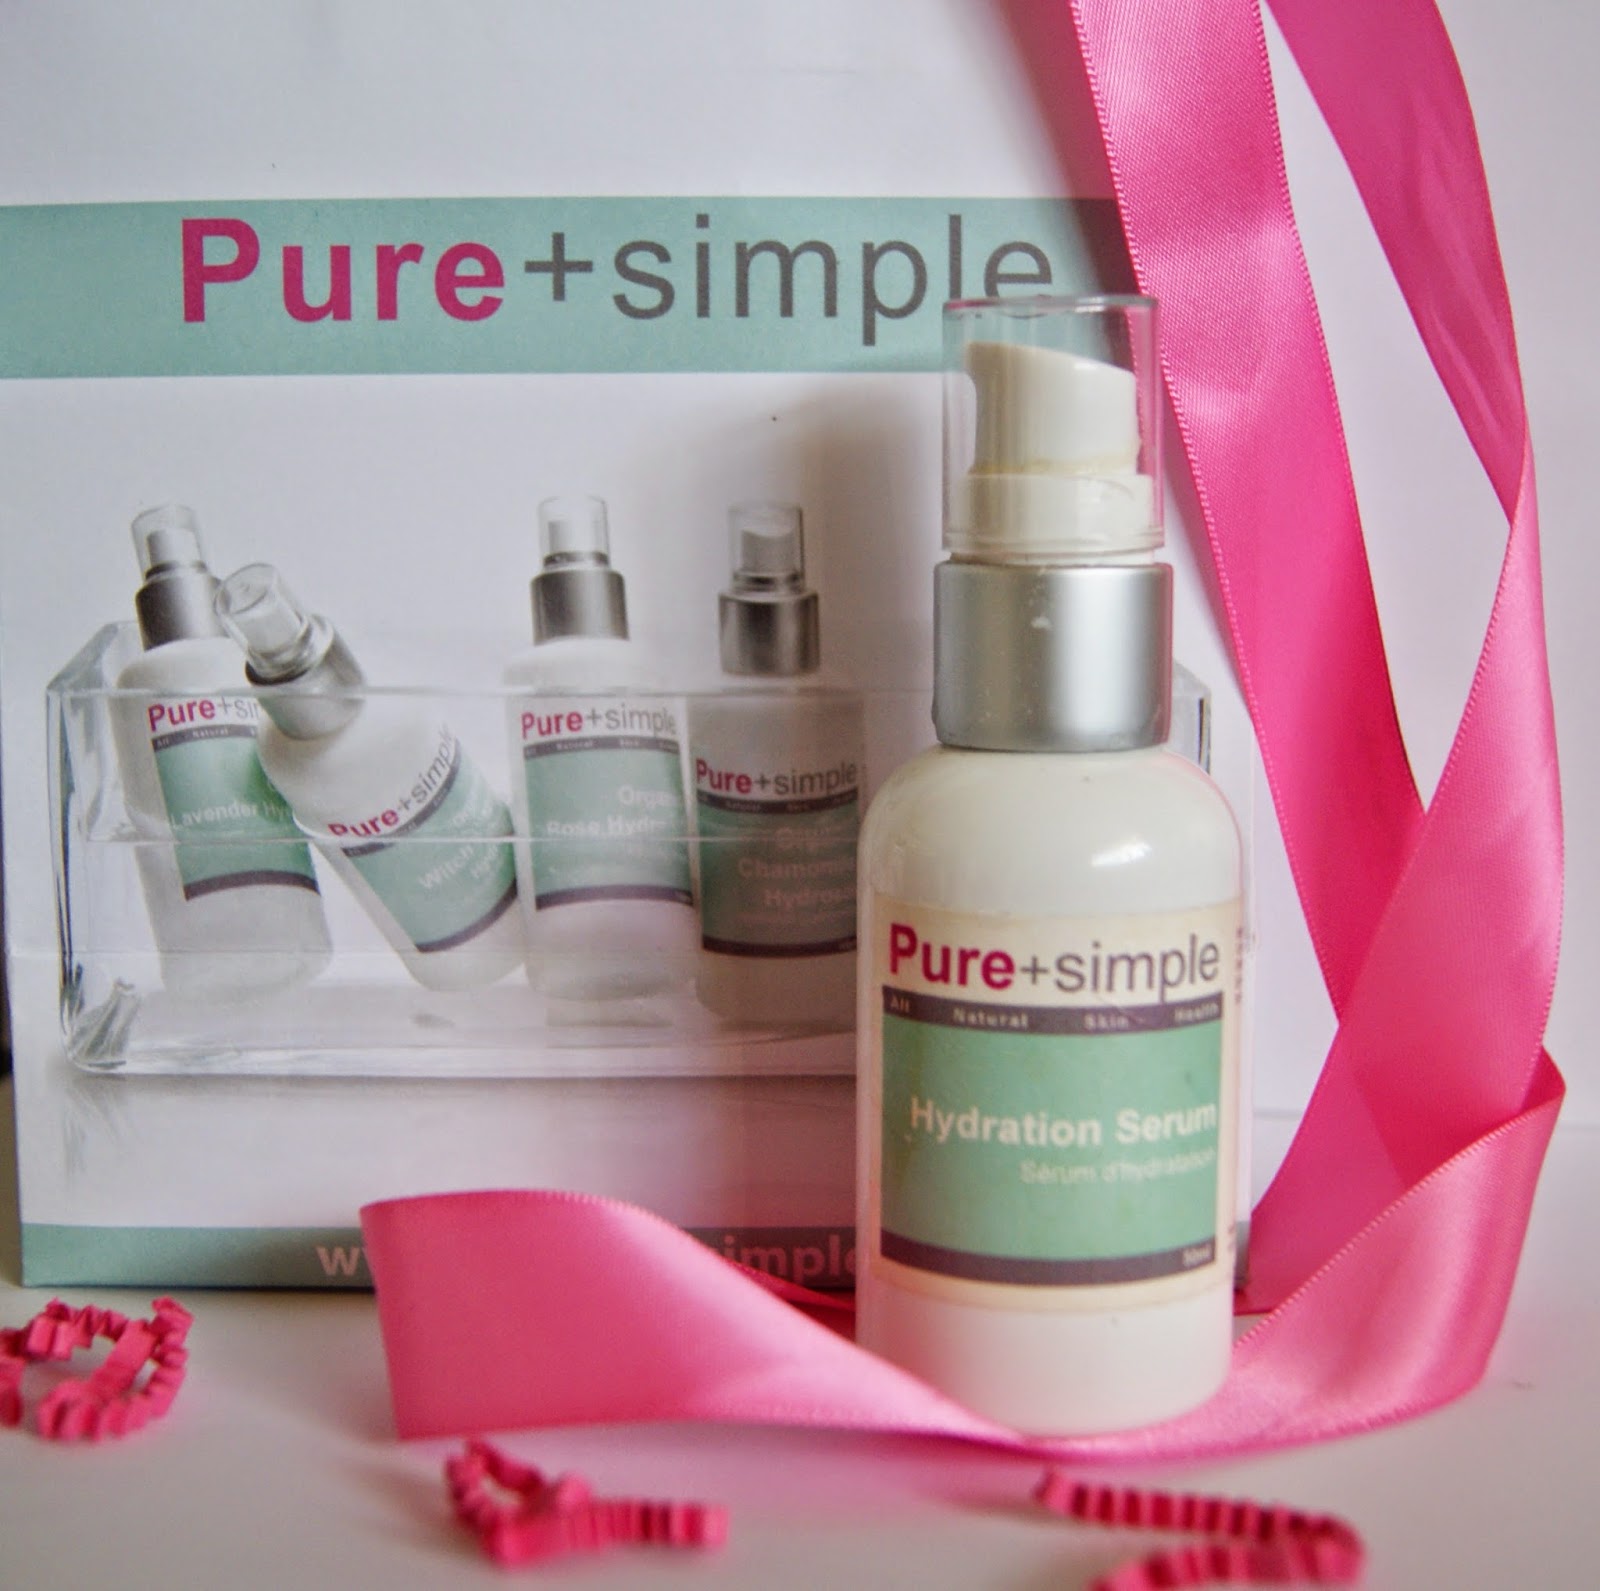 Pure + Simple Hydration Serum Review, Skincare, Beauty, Melanie_Ps, The Purple Scarf, Toronto, Ontario, Canada, Face, Facial, Skin, Blemishes, redness